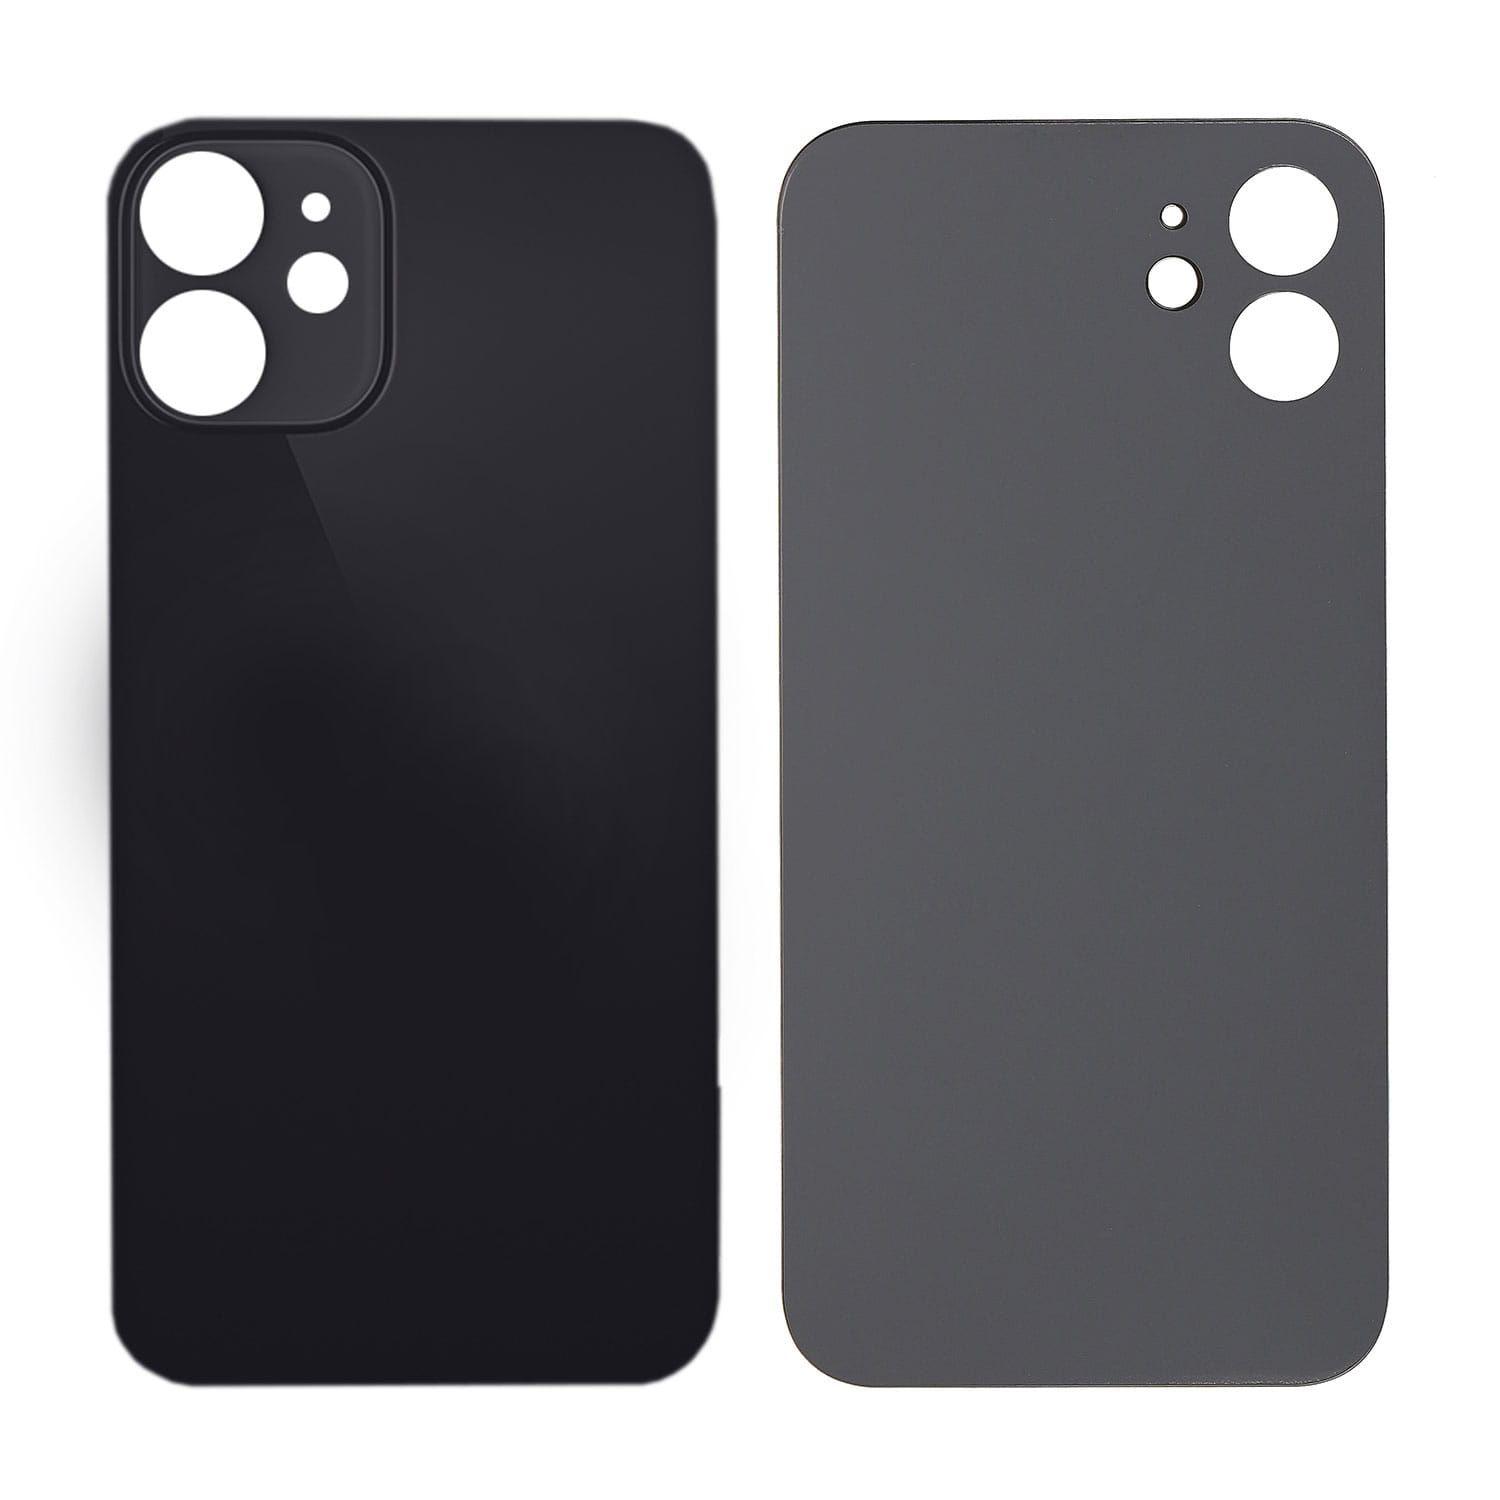 Battery cover iPhone 12 with bigger hole for camera glass - black